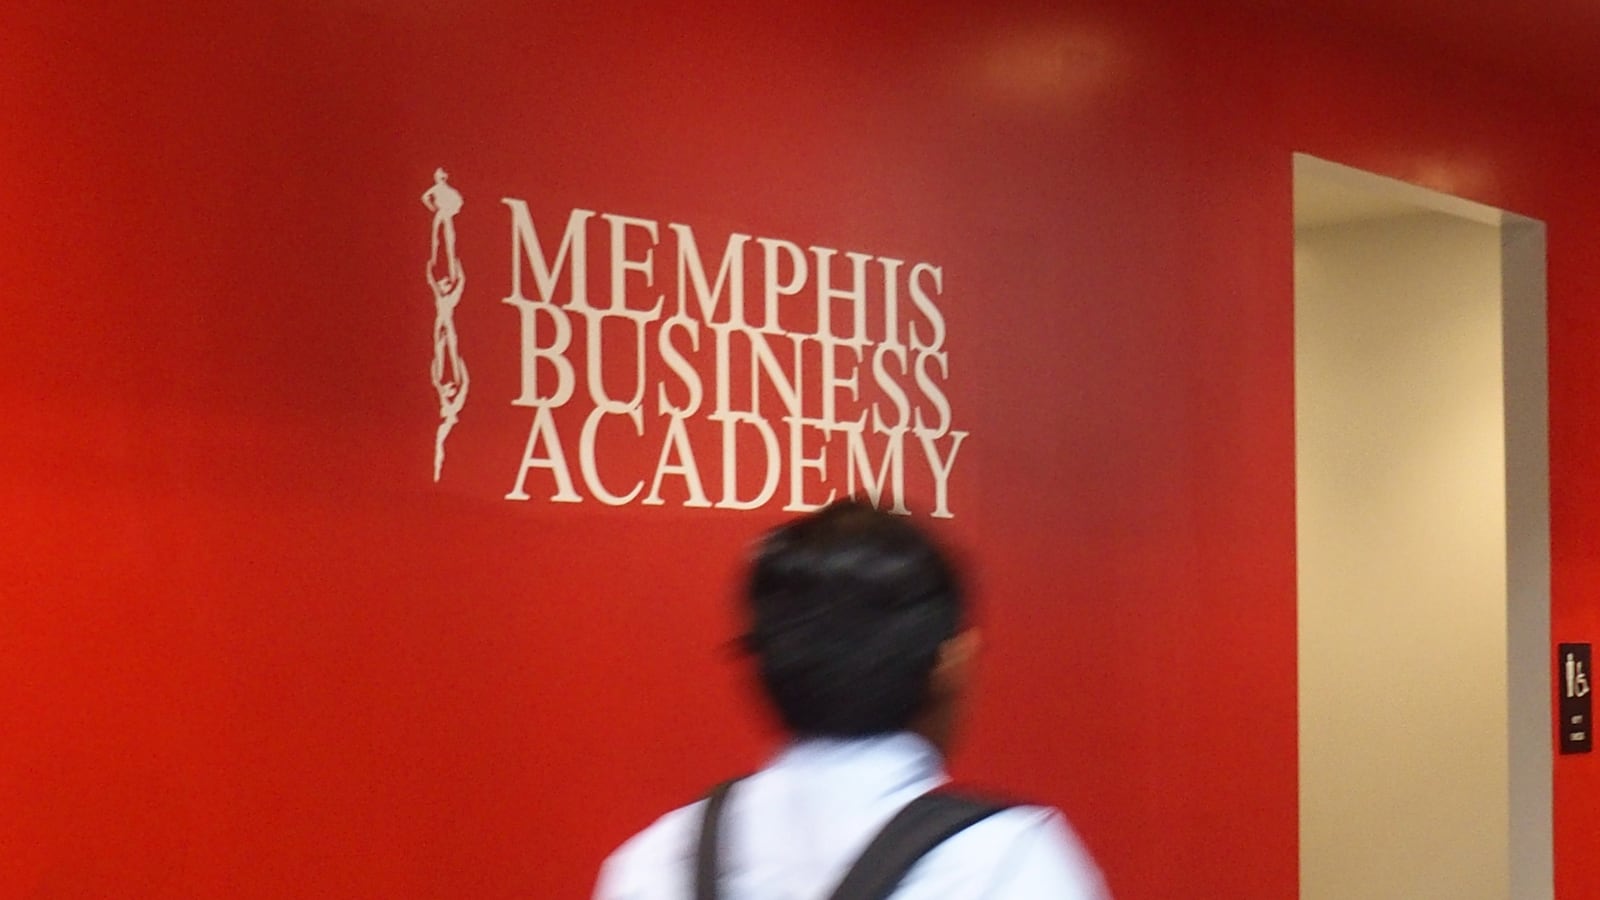 About 1,000 middle and high school students are enrolled at Memphis Business Academy's campus in Frayser.